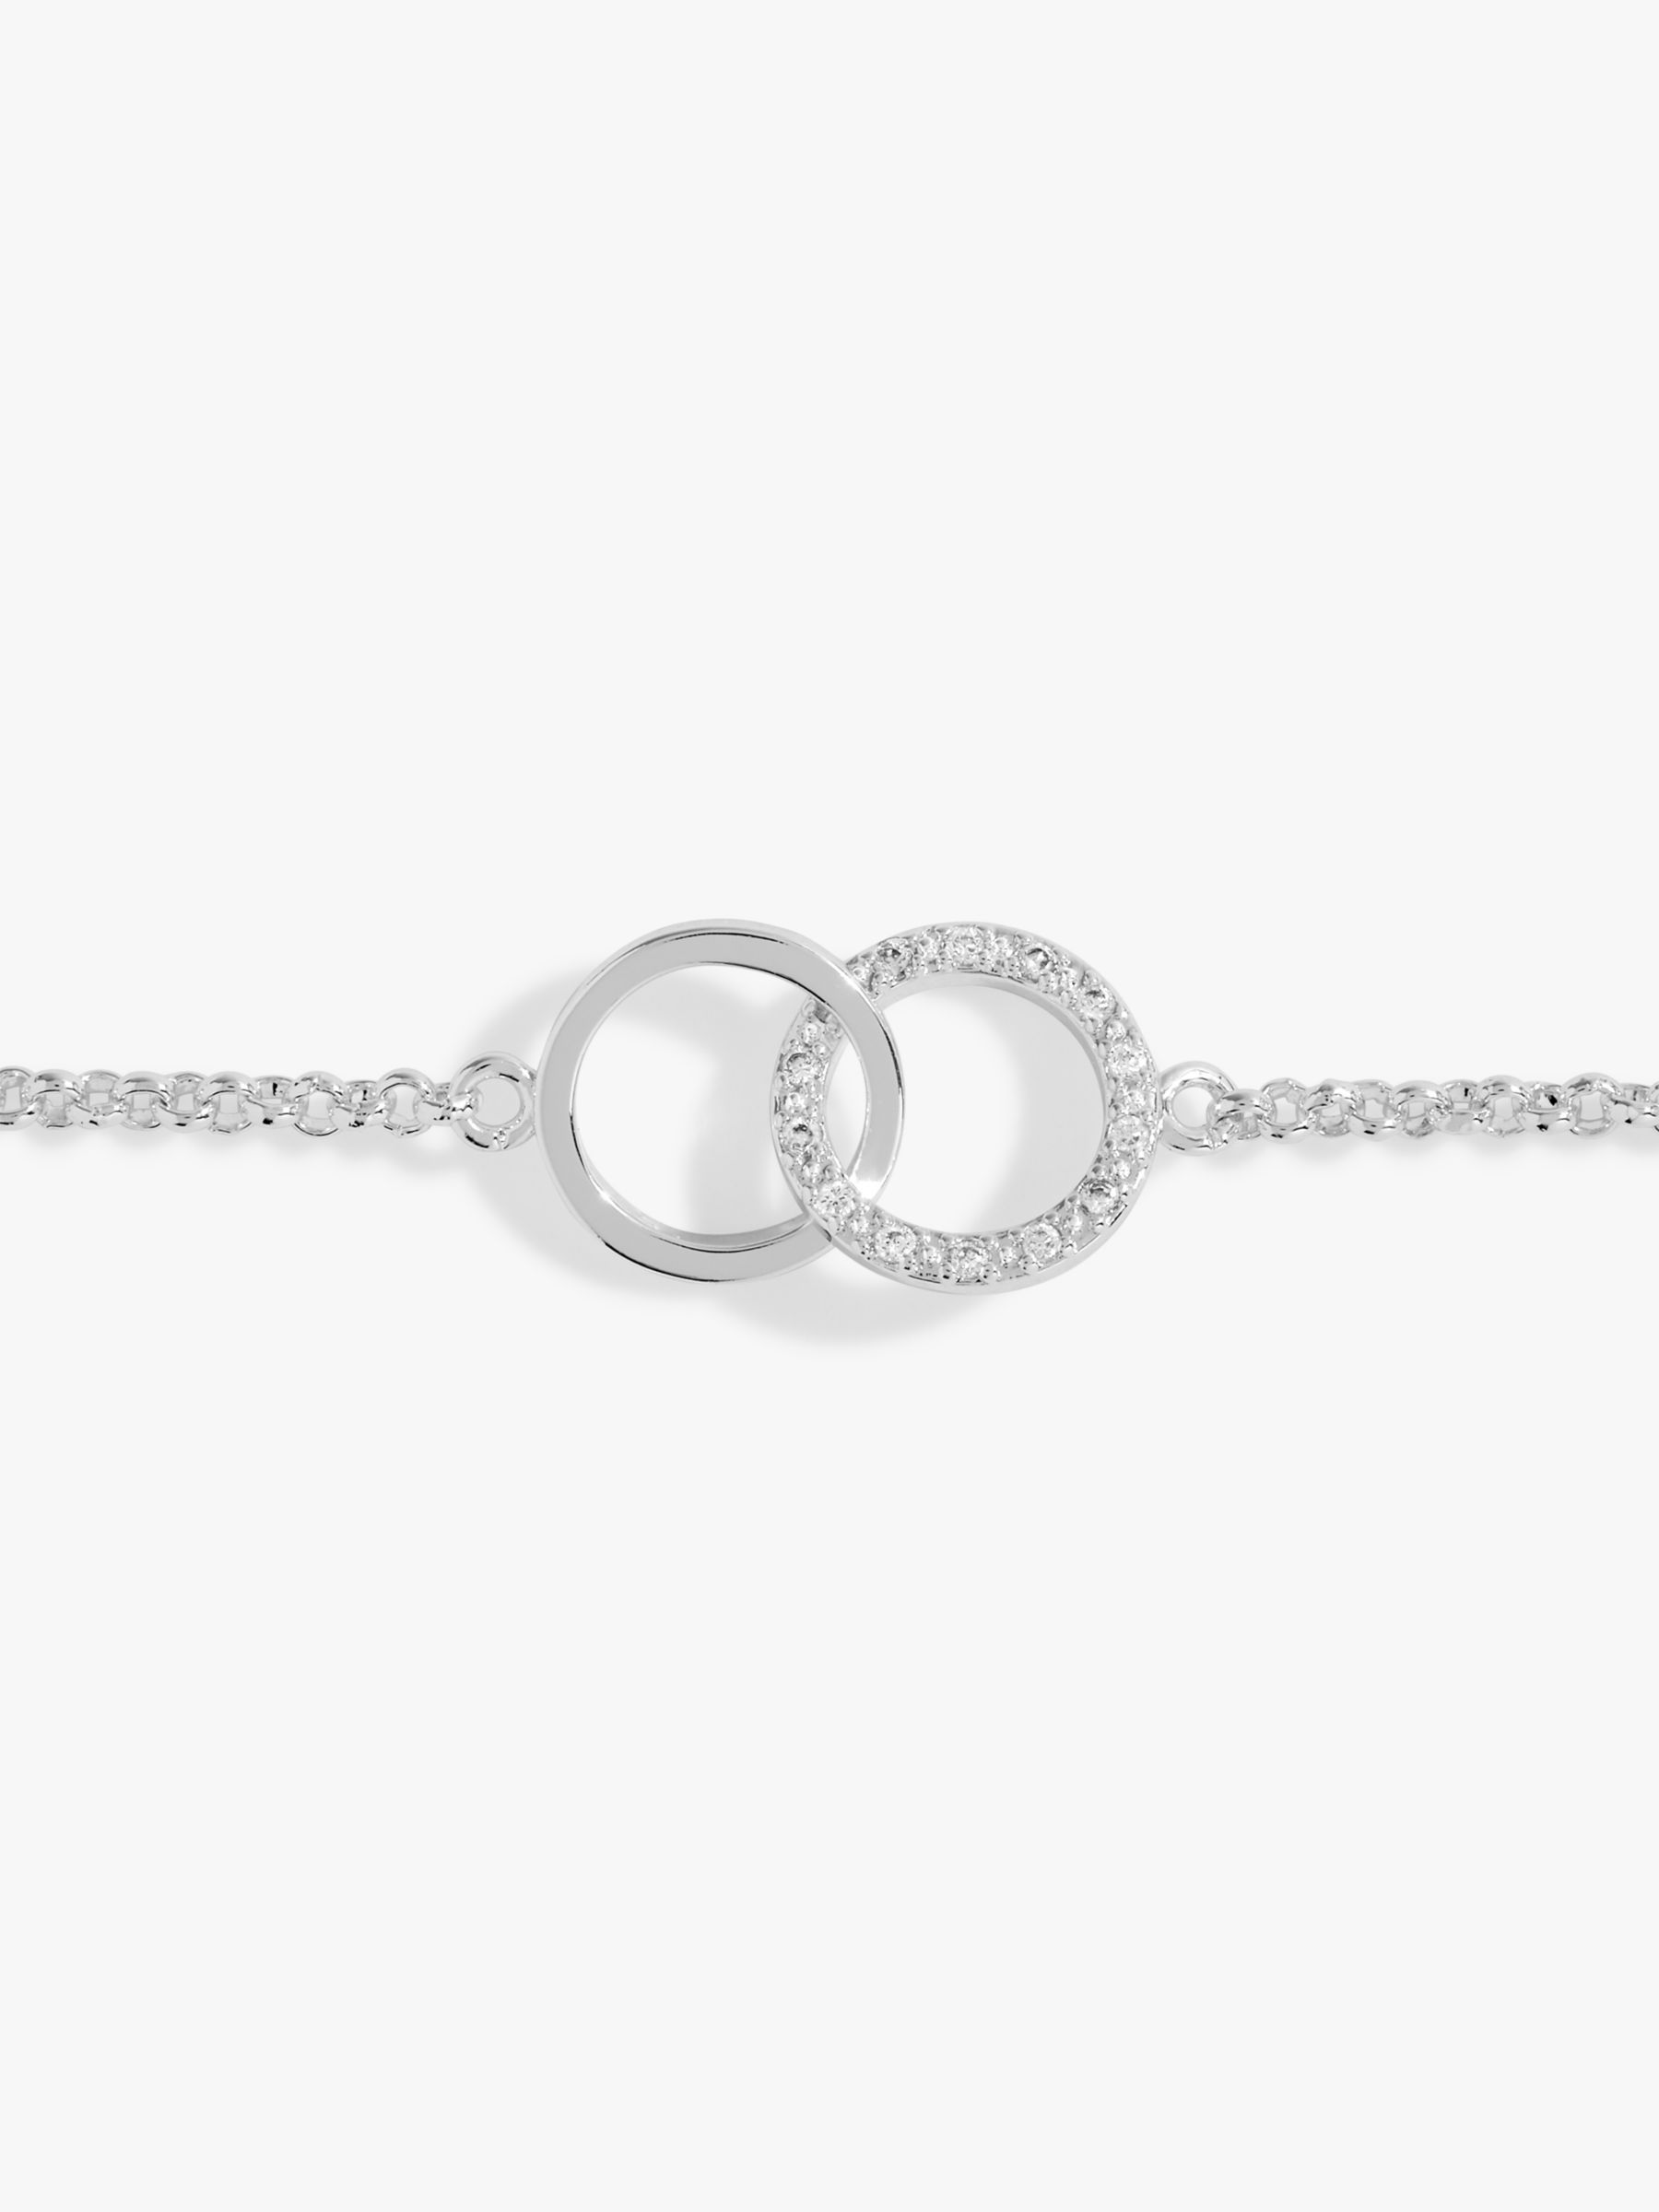 Buy Joma Jewellery Infinity Links Circle Chain Bracelet, Silver Online at johnlewis.com